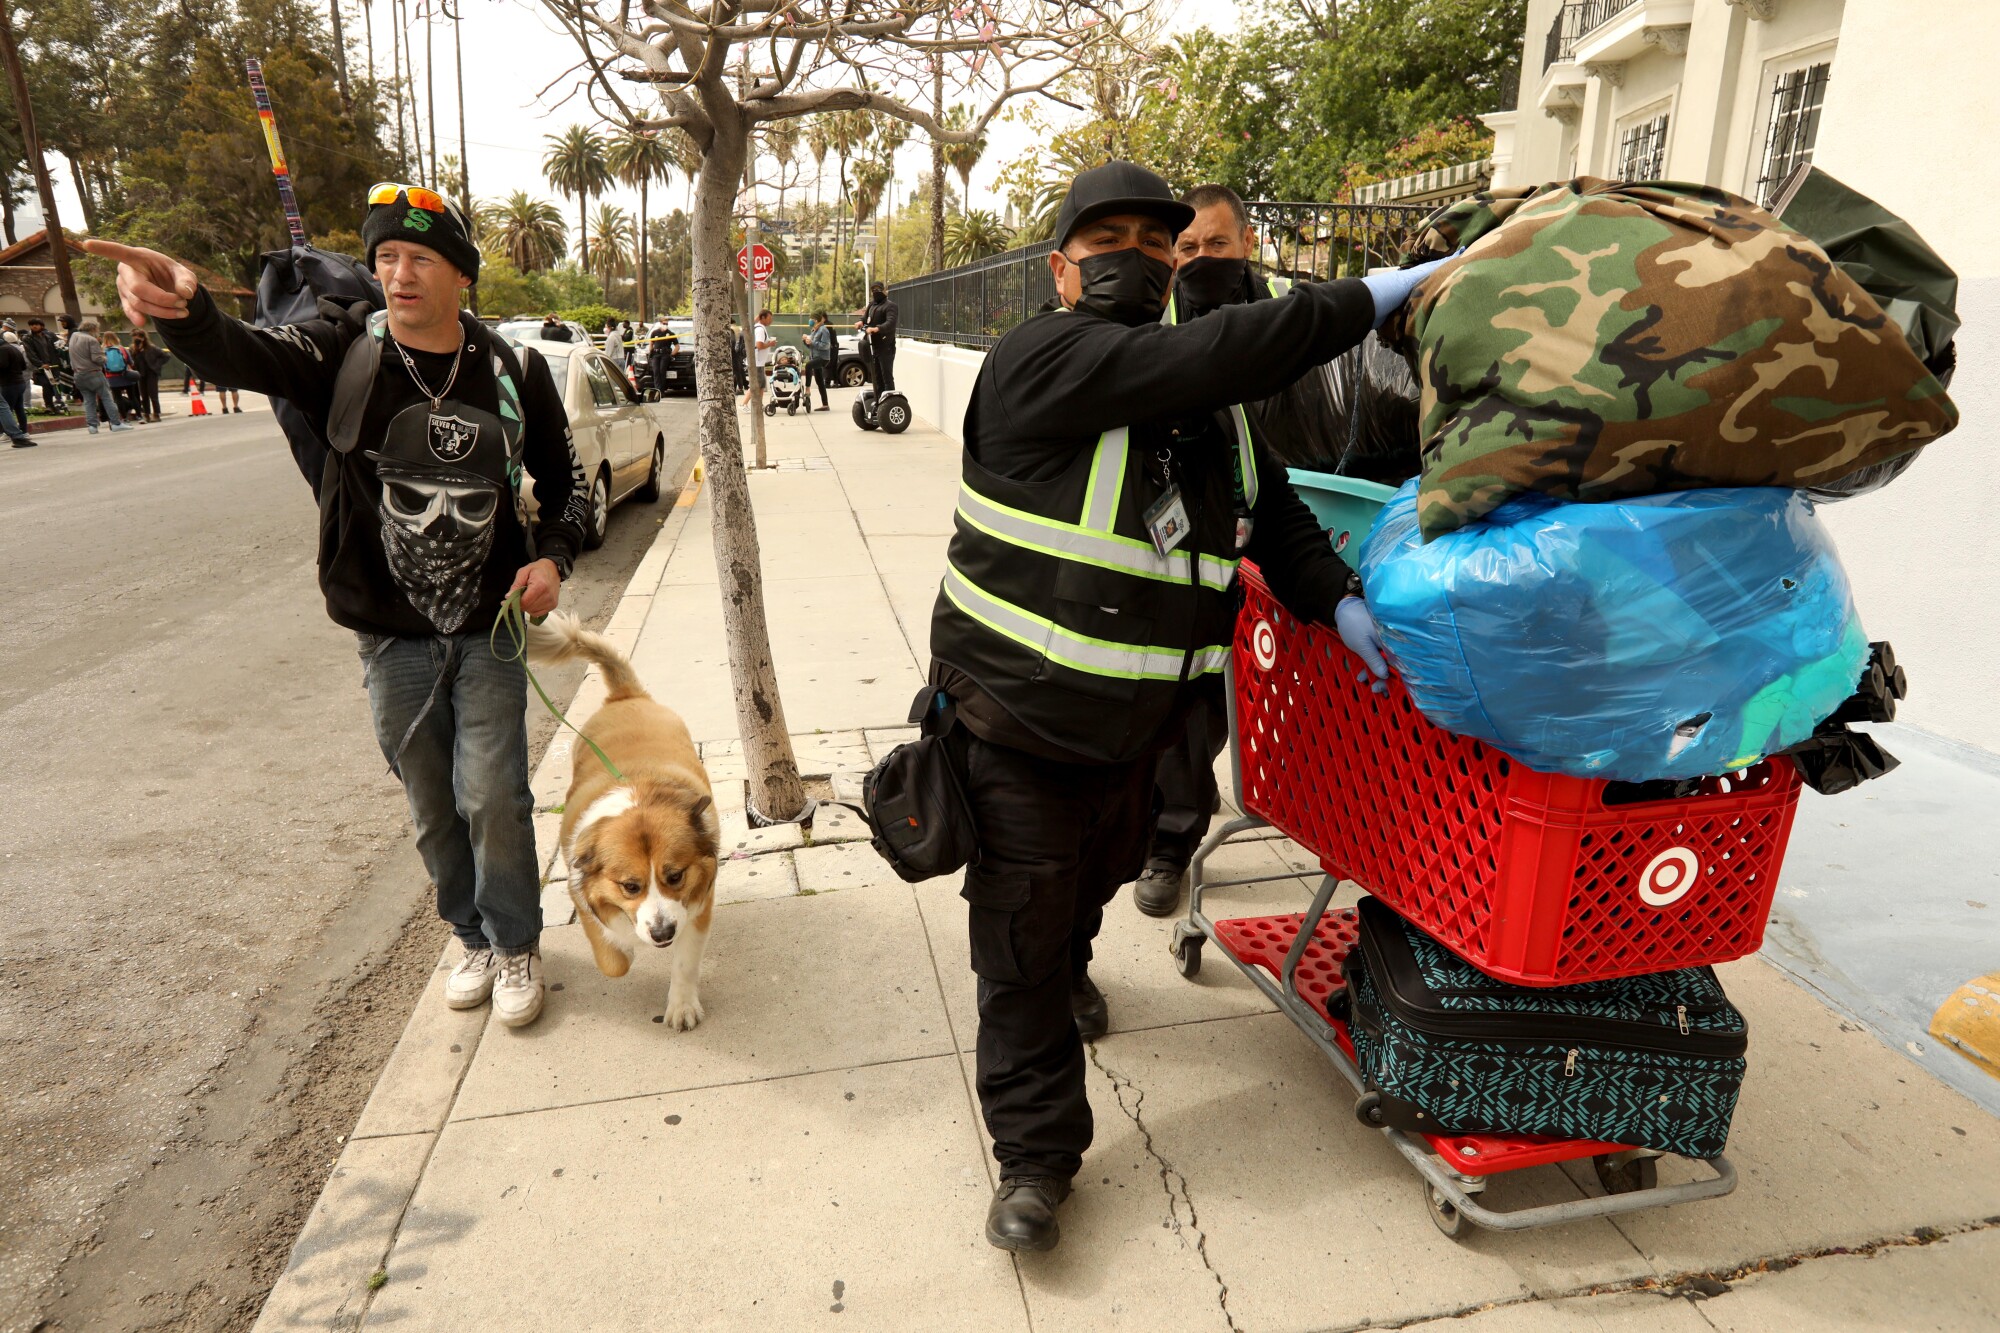 Members of Urban Alchemy helped Jason Reynolds with his belongings, after they were evicted from Echo Park 